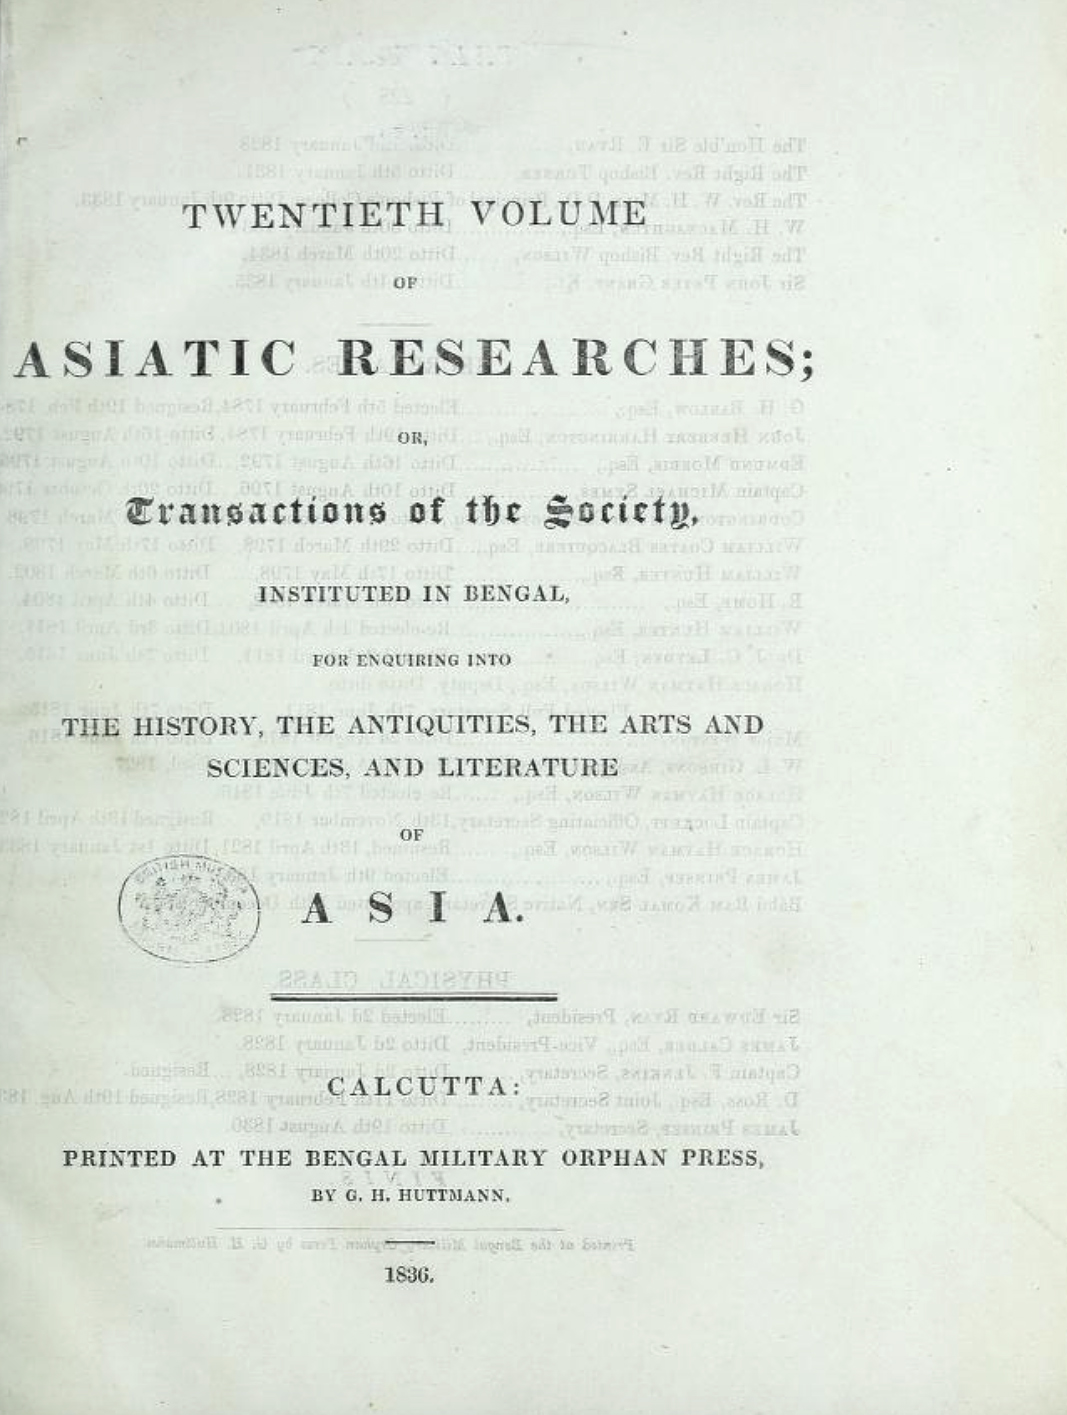 Asiatic Researches 20th Vol. 1836-front.jpg